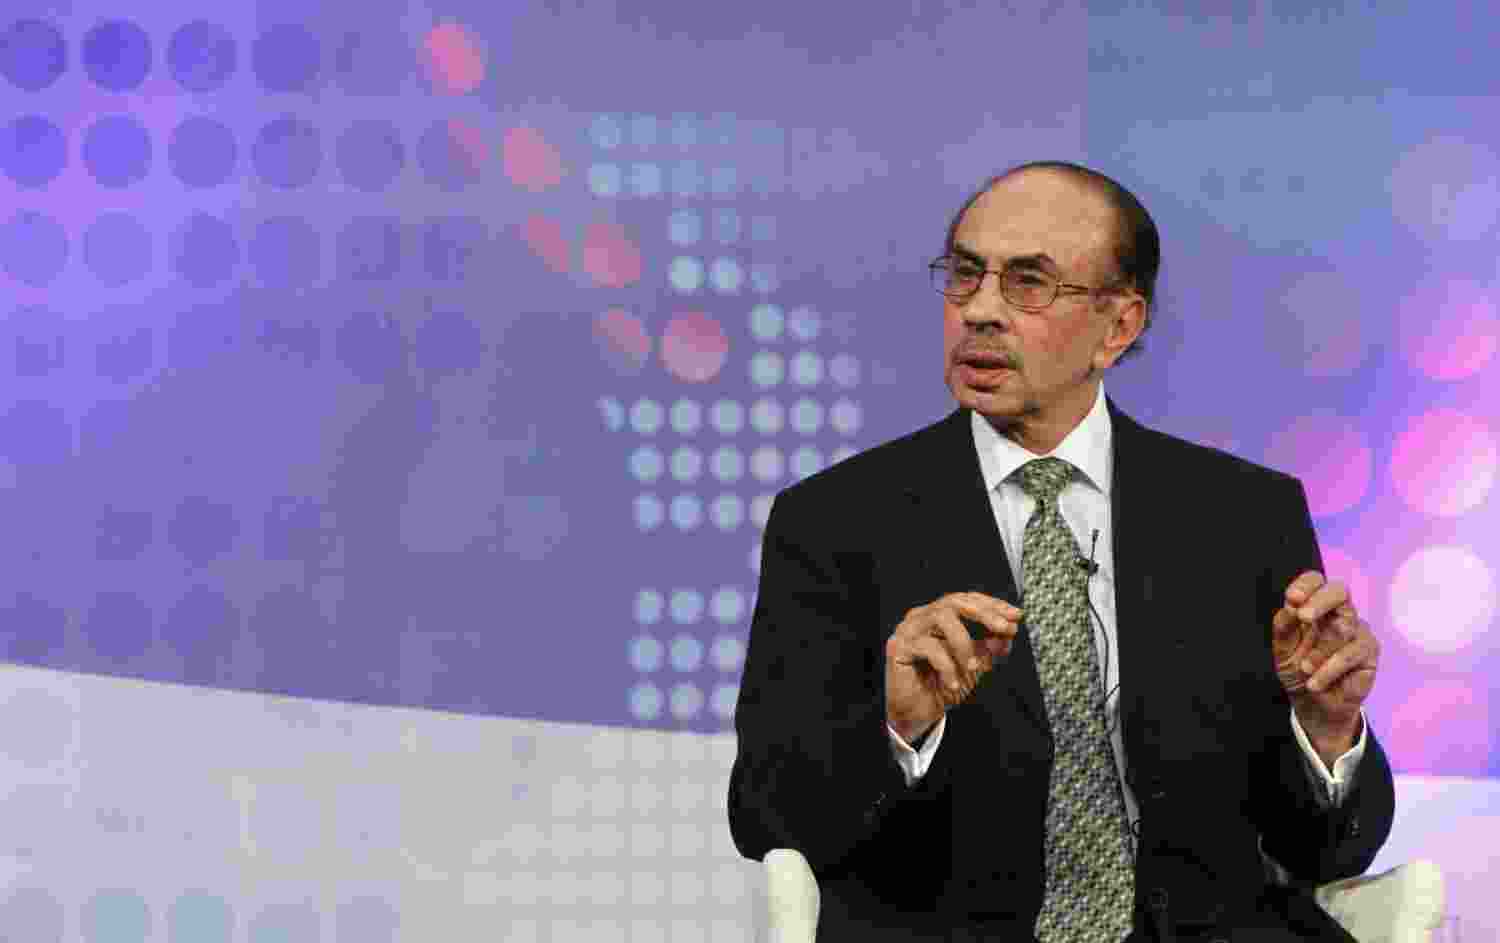 127-year-old Godrej empire splits: An inside look at the family realignment